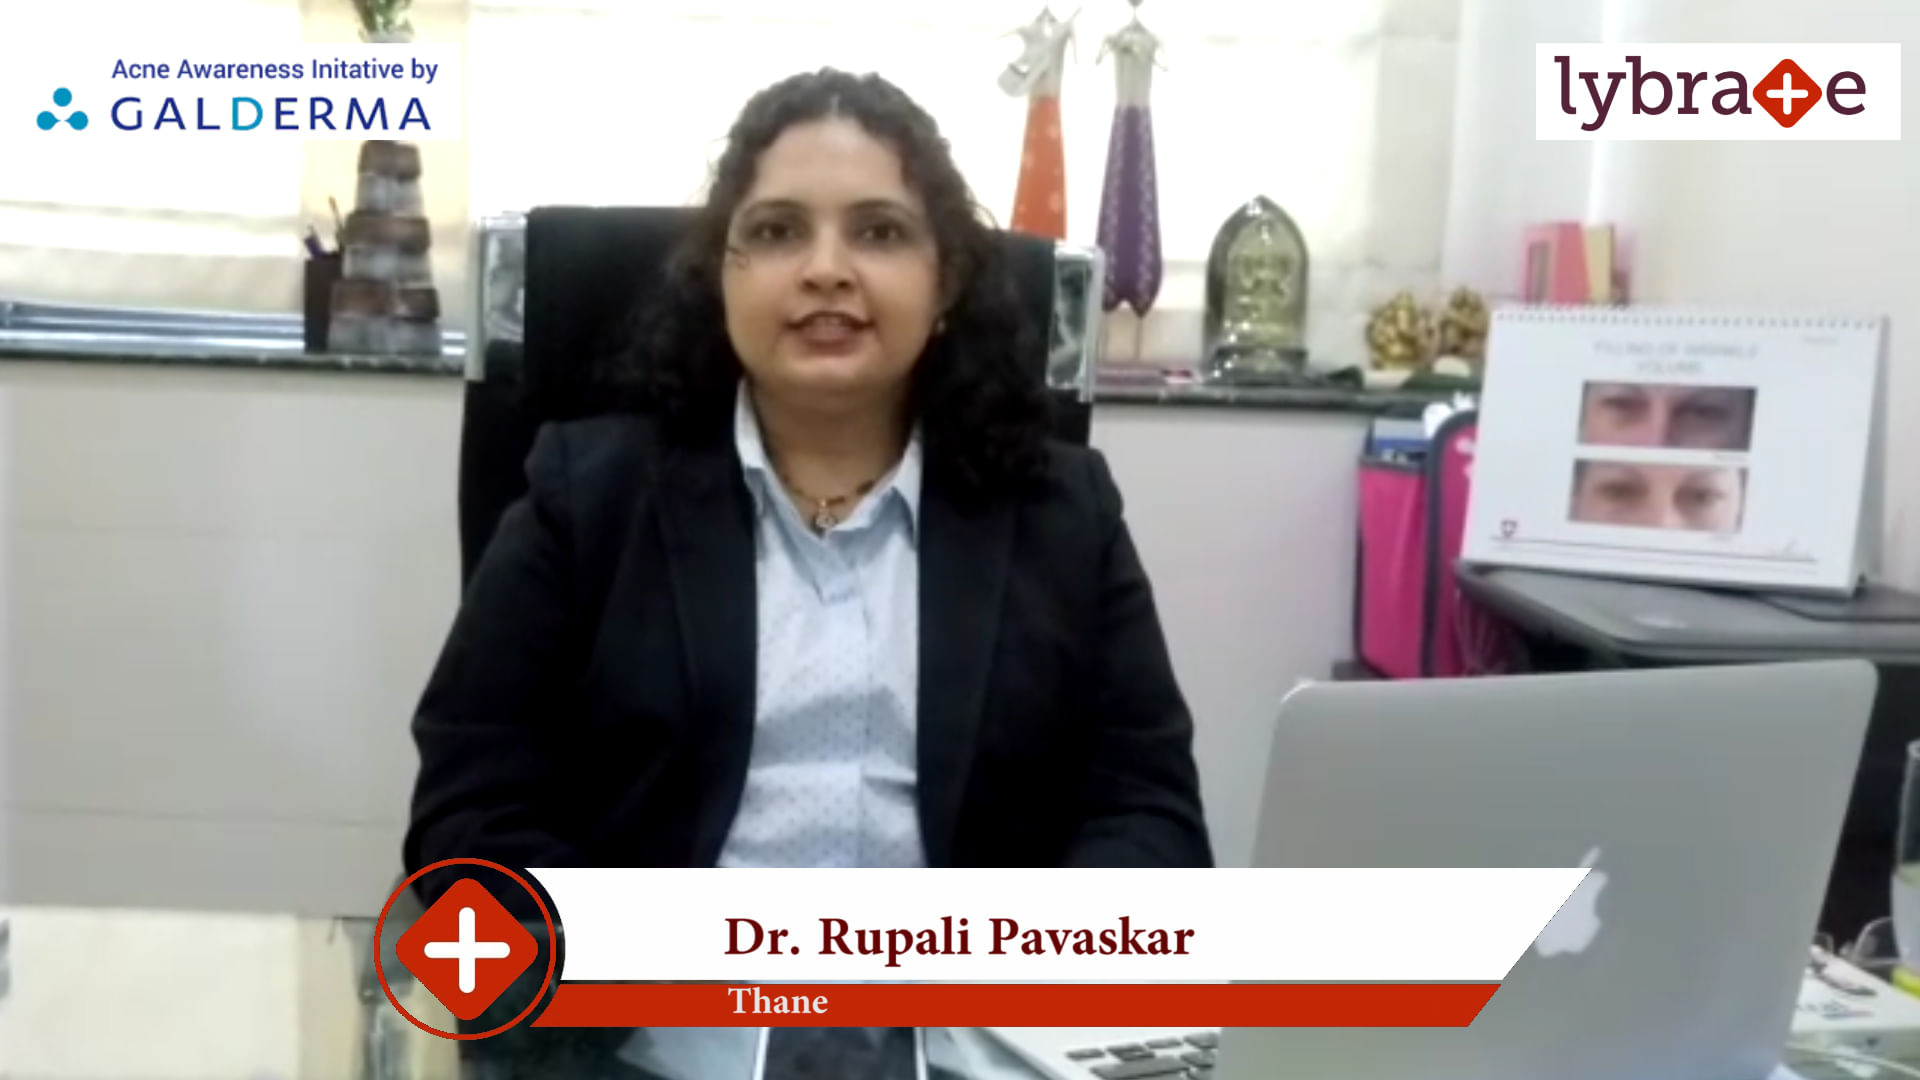 Lybrate | Dr. Rupali Pavaskar speaks on IMPORTANCE OF TREATING ACNE EARLY